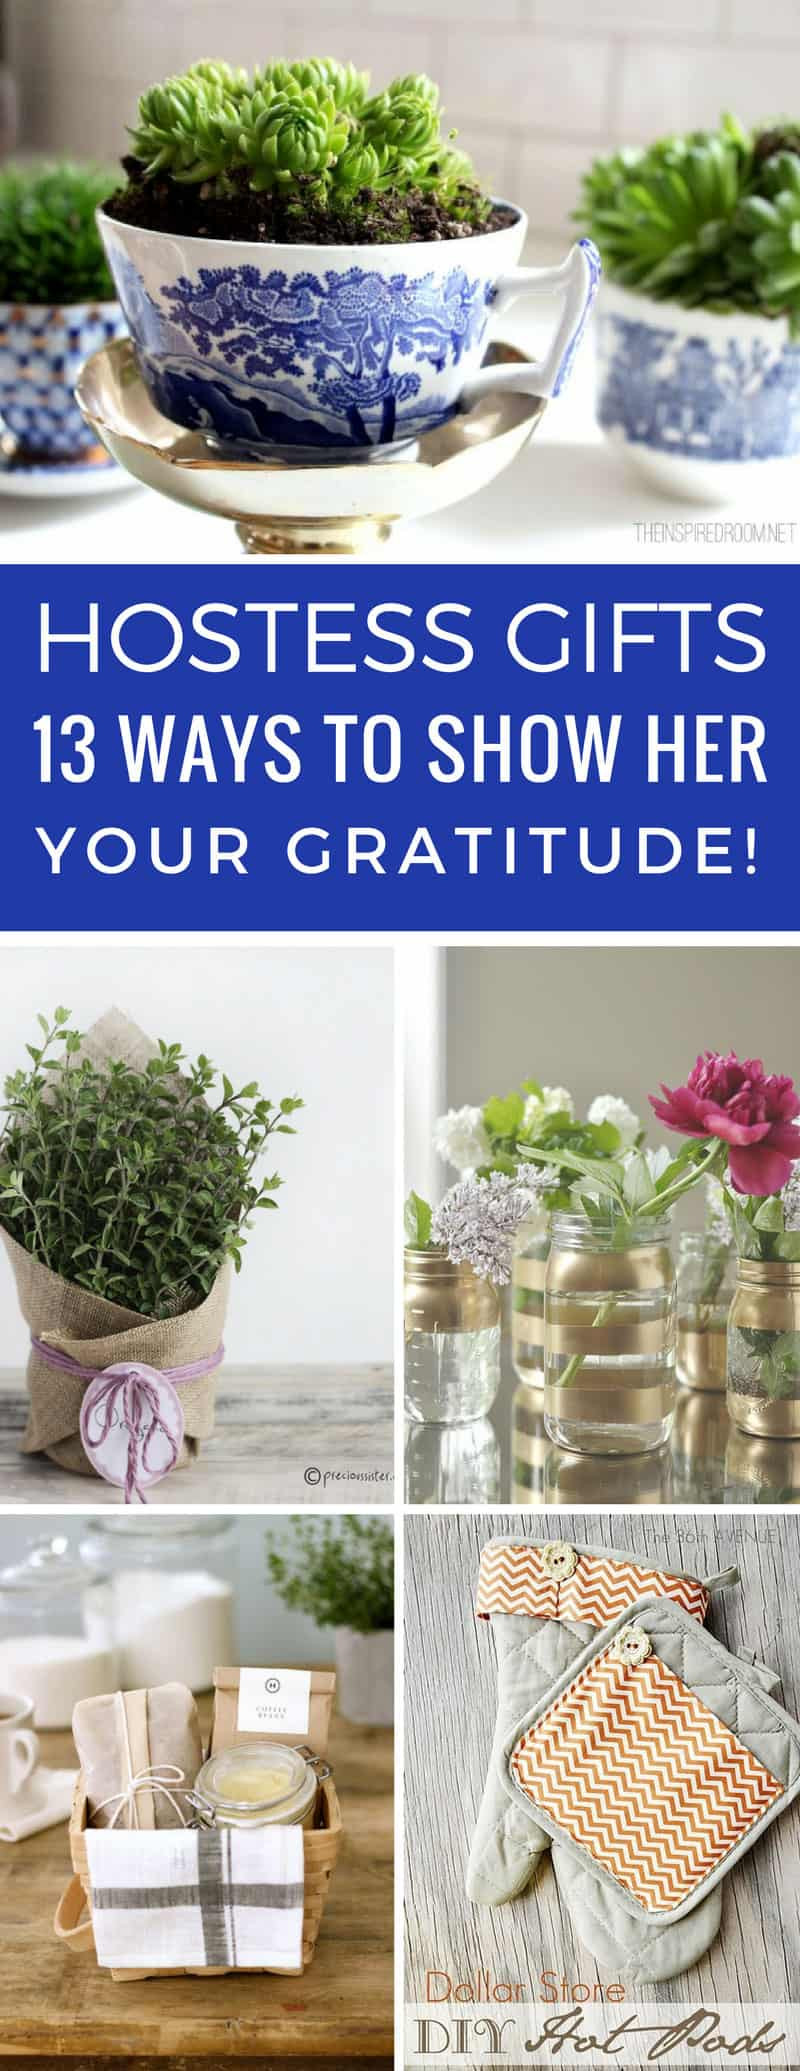 Gift Ideas For Thanksgiving Hostess
 13 DIY Hostess Gift Ideas Homemade Gifts that Will Get